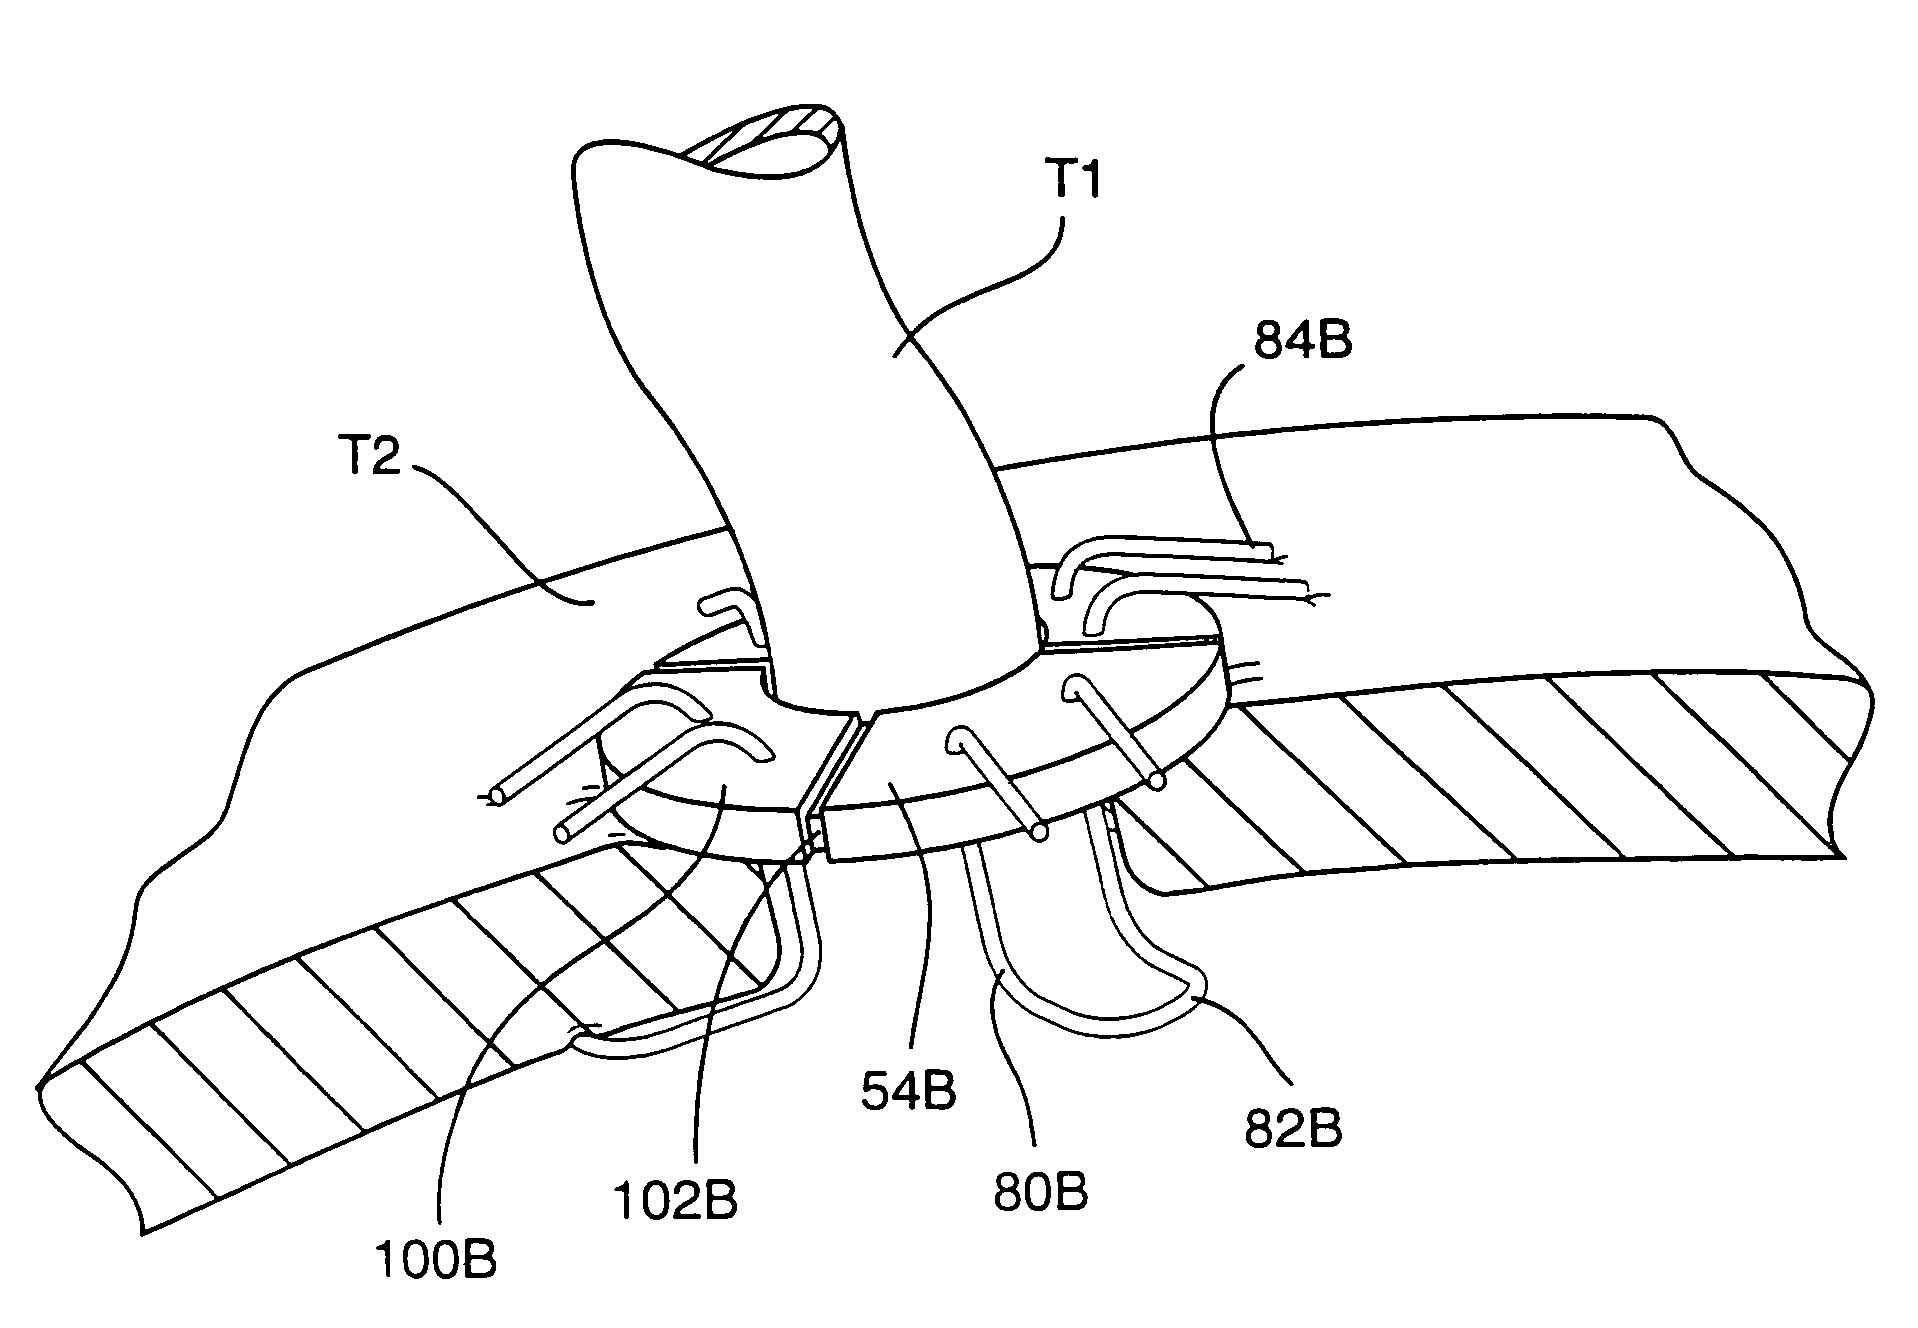 System for performing vascular anastomoses